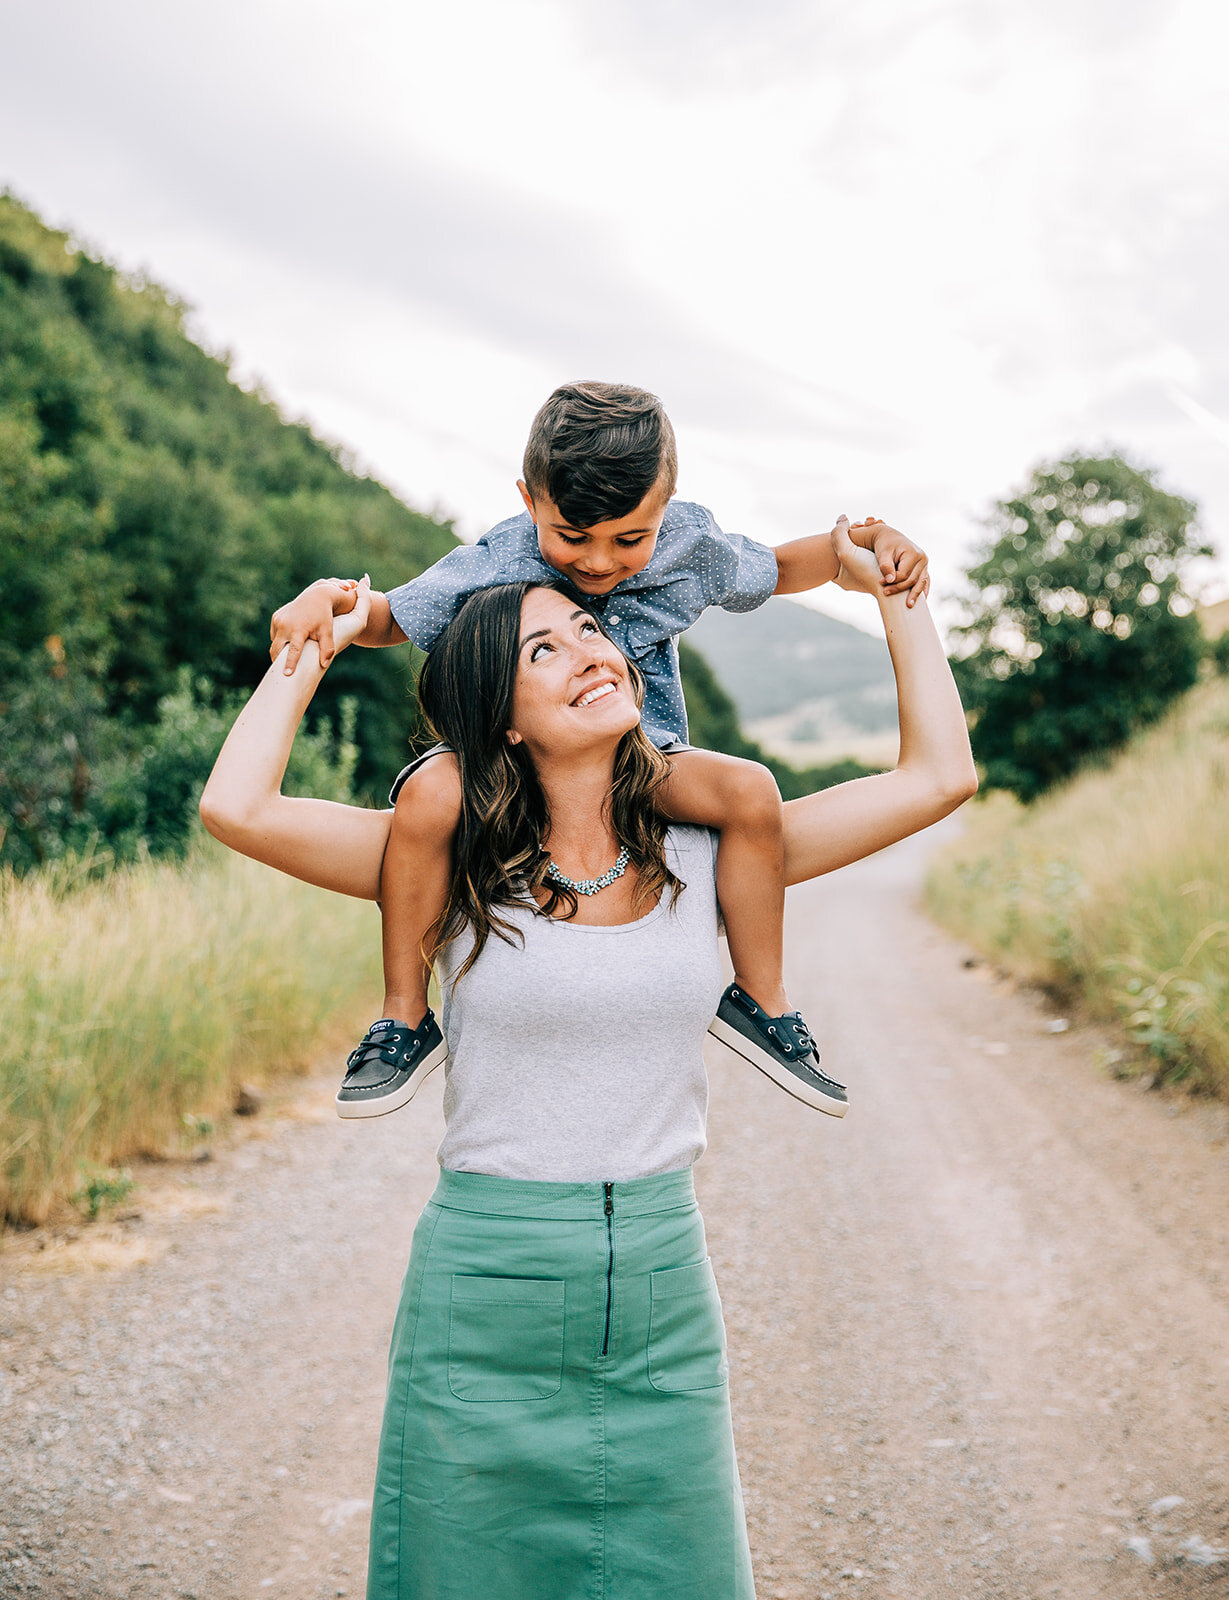  mom and child posing piggy back ride young boy on his mom’s shoulders teal skirt blue button up toddler outfit coordination for family pictures shades of blue and green matching color scheme outfit inspo for family photography with professional fami